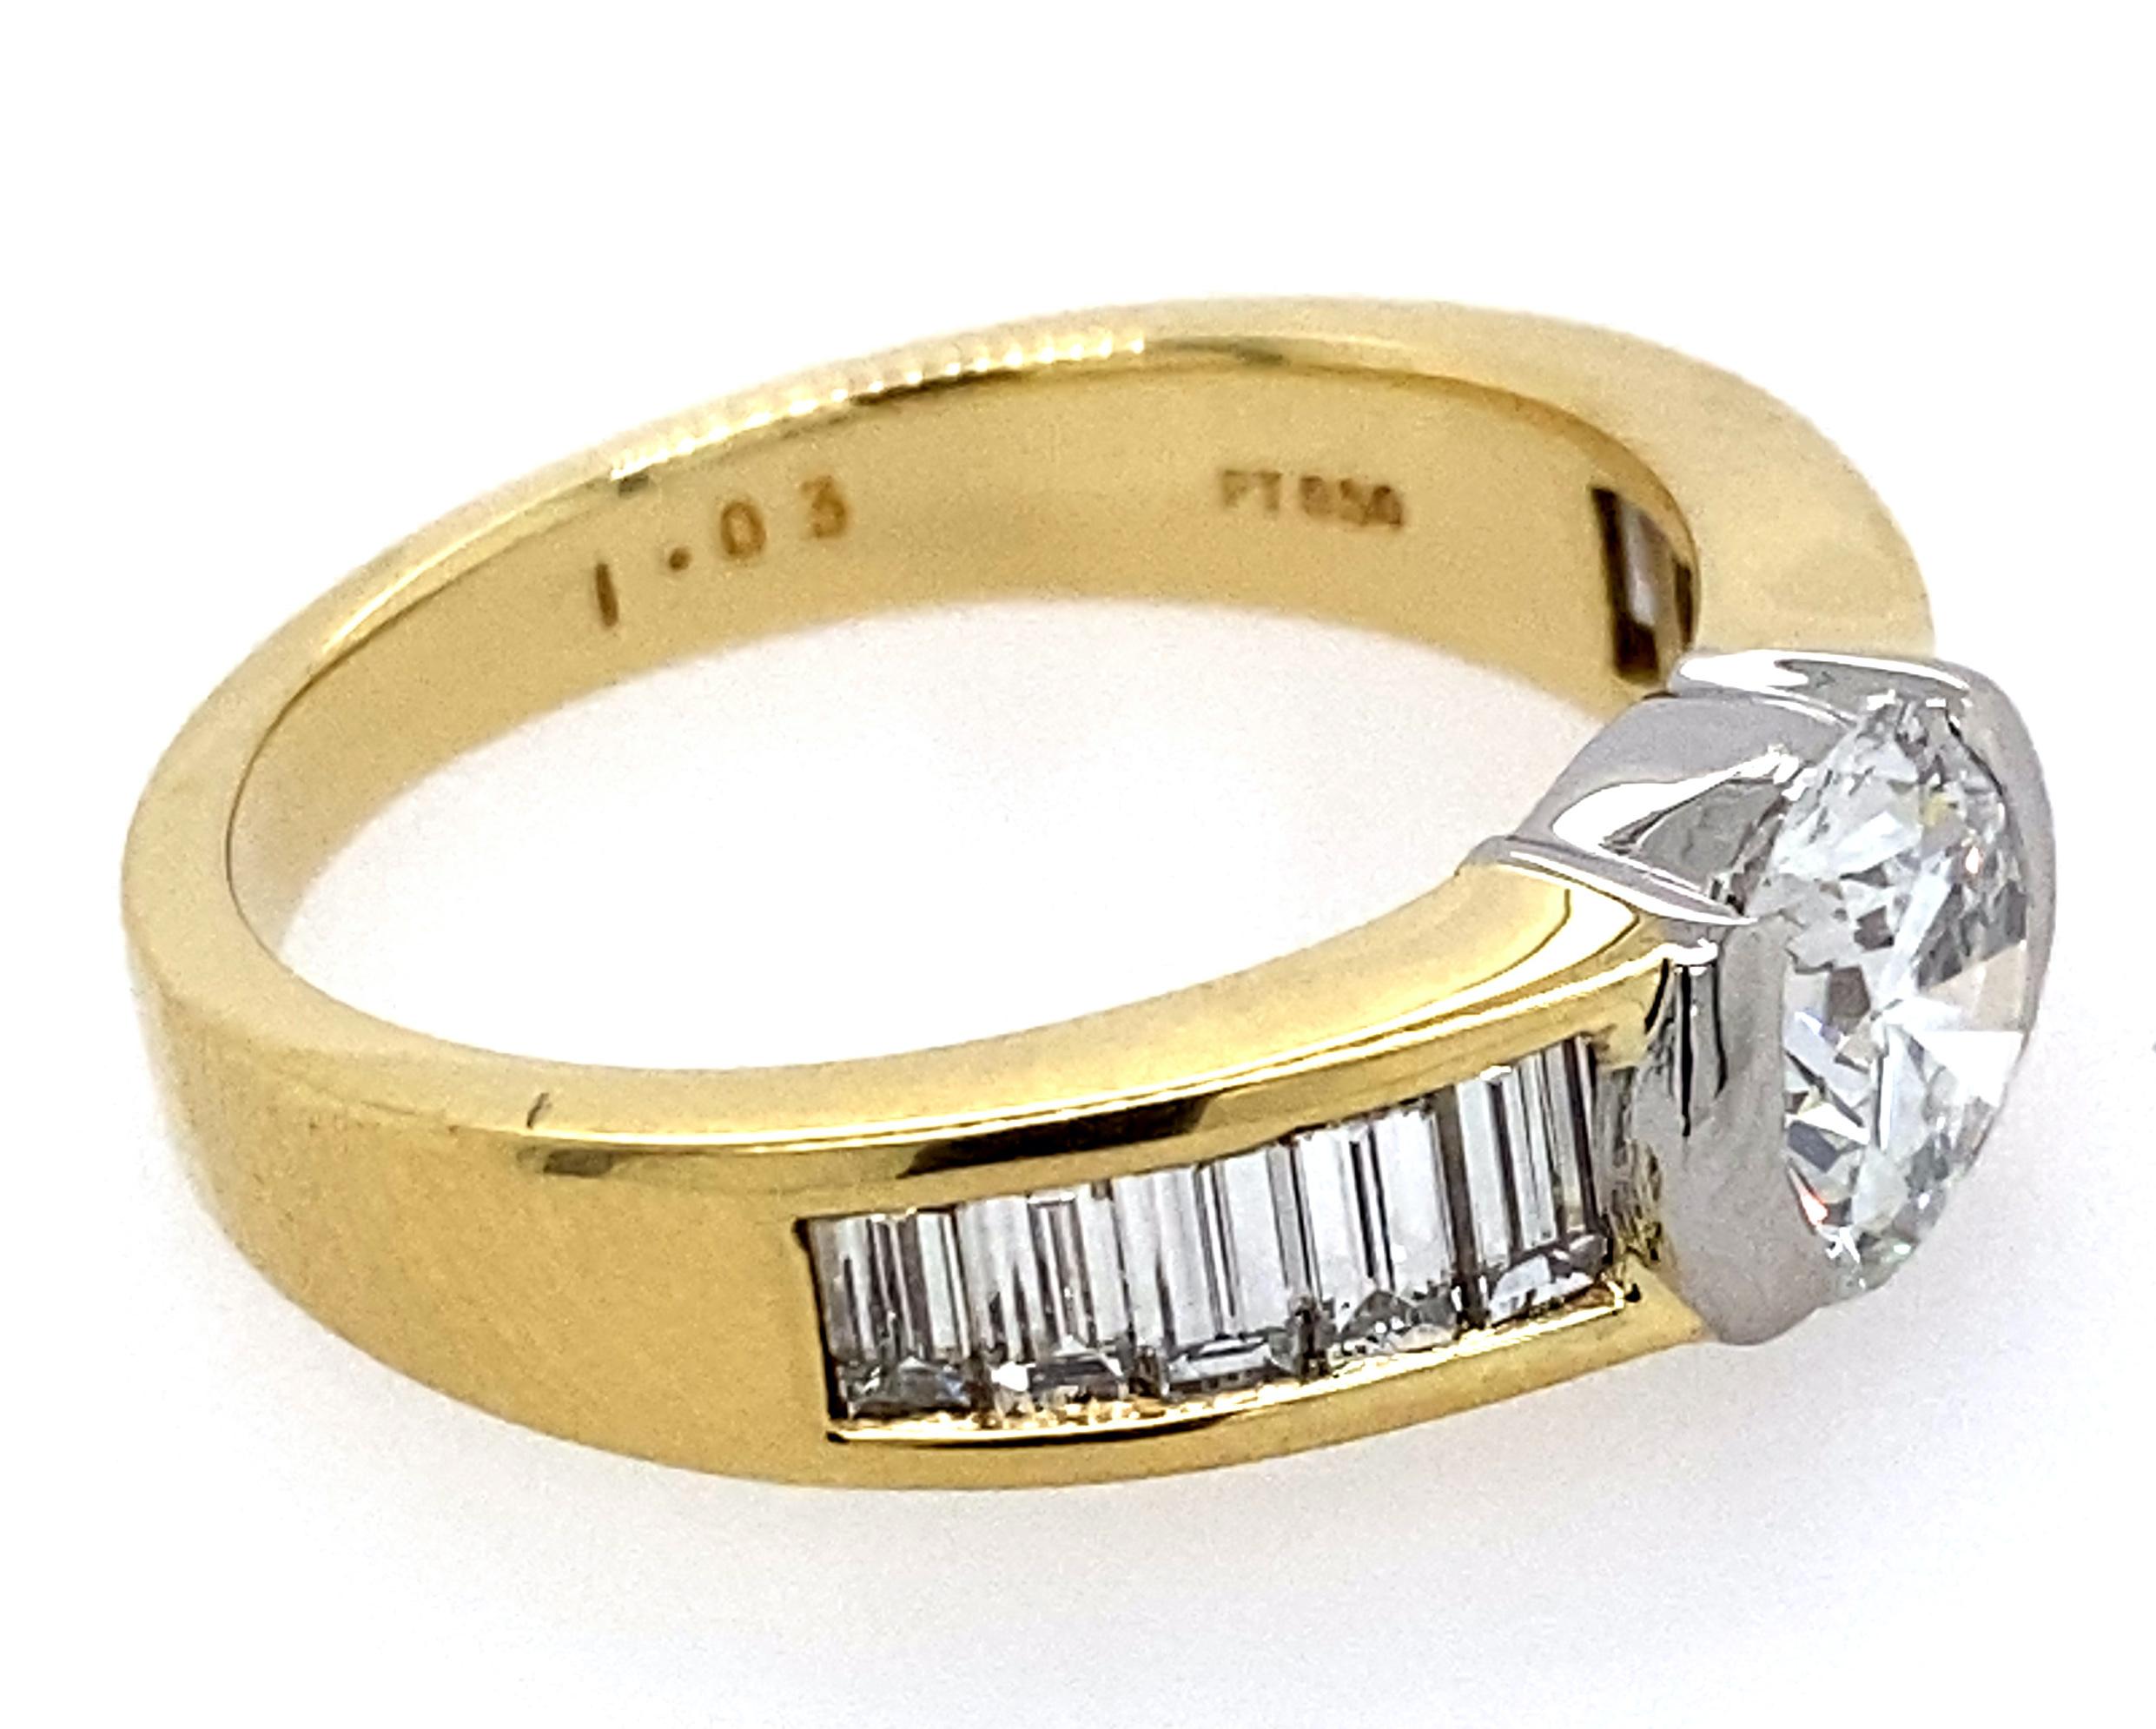 Tiffany & Co. 18k Gold, Platinum and Diamond Ring In Excellent Condition For Sale In New York, NY